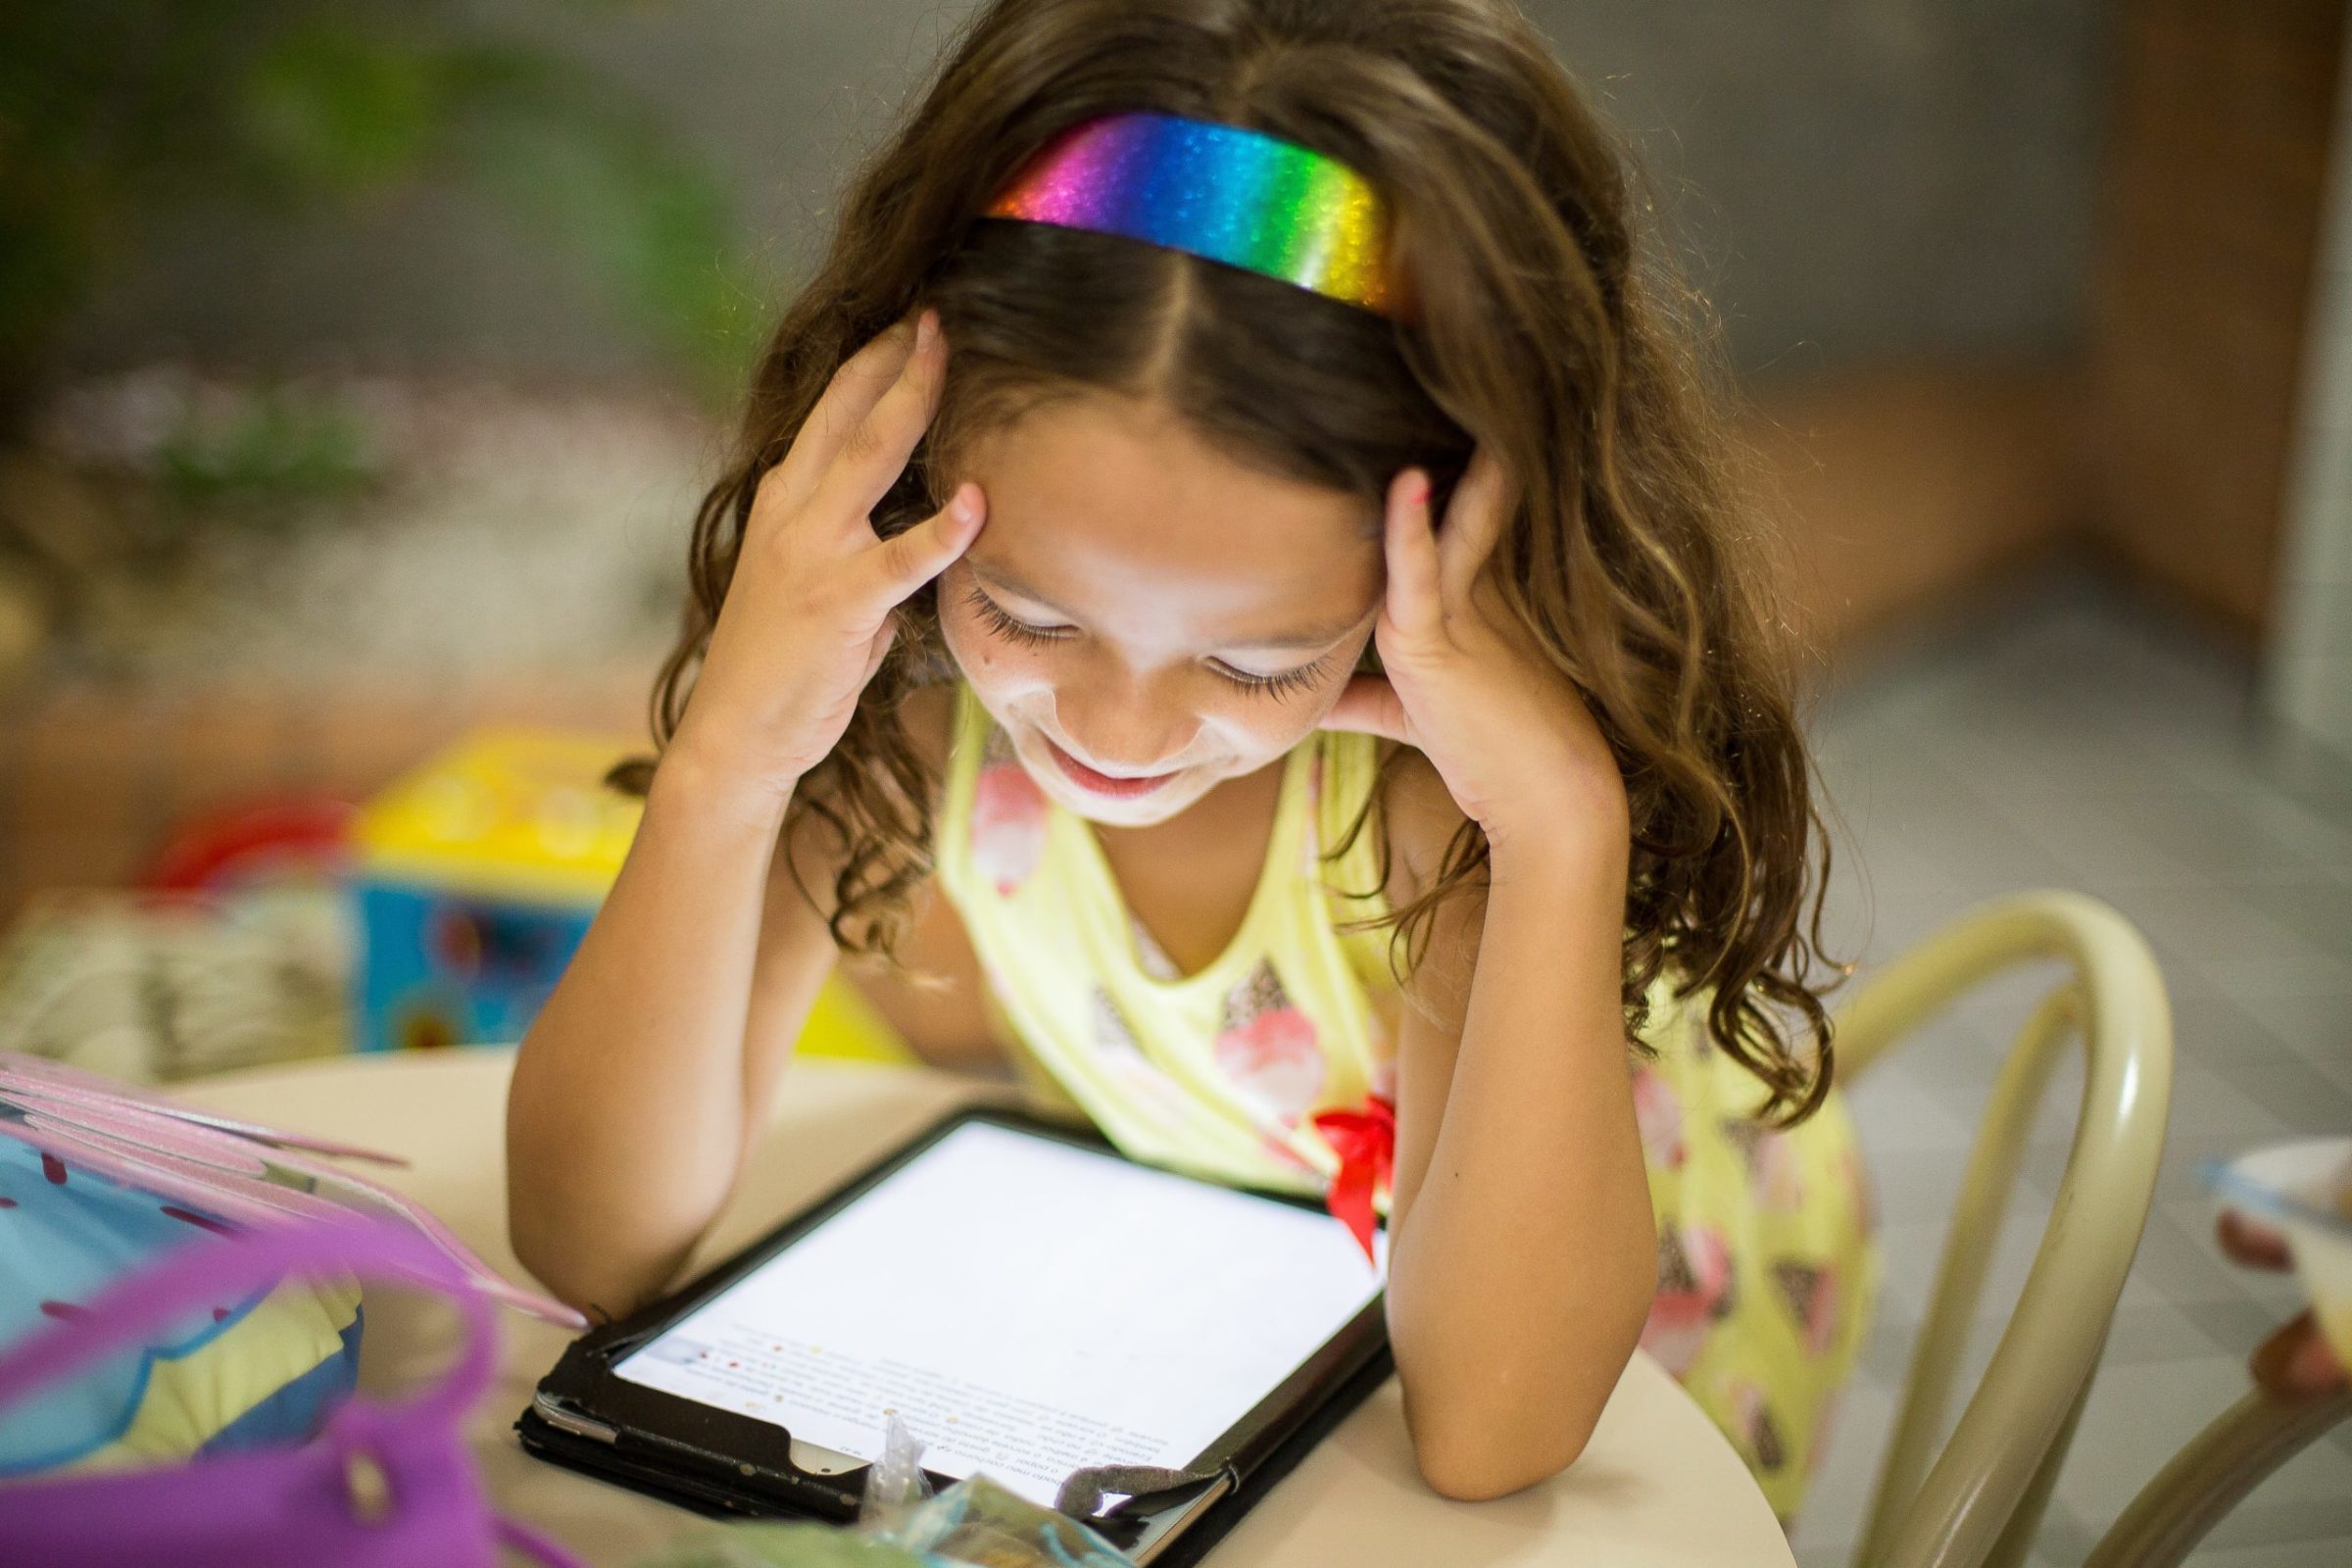 Should You Buy Your Child an iPad for Christmas?